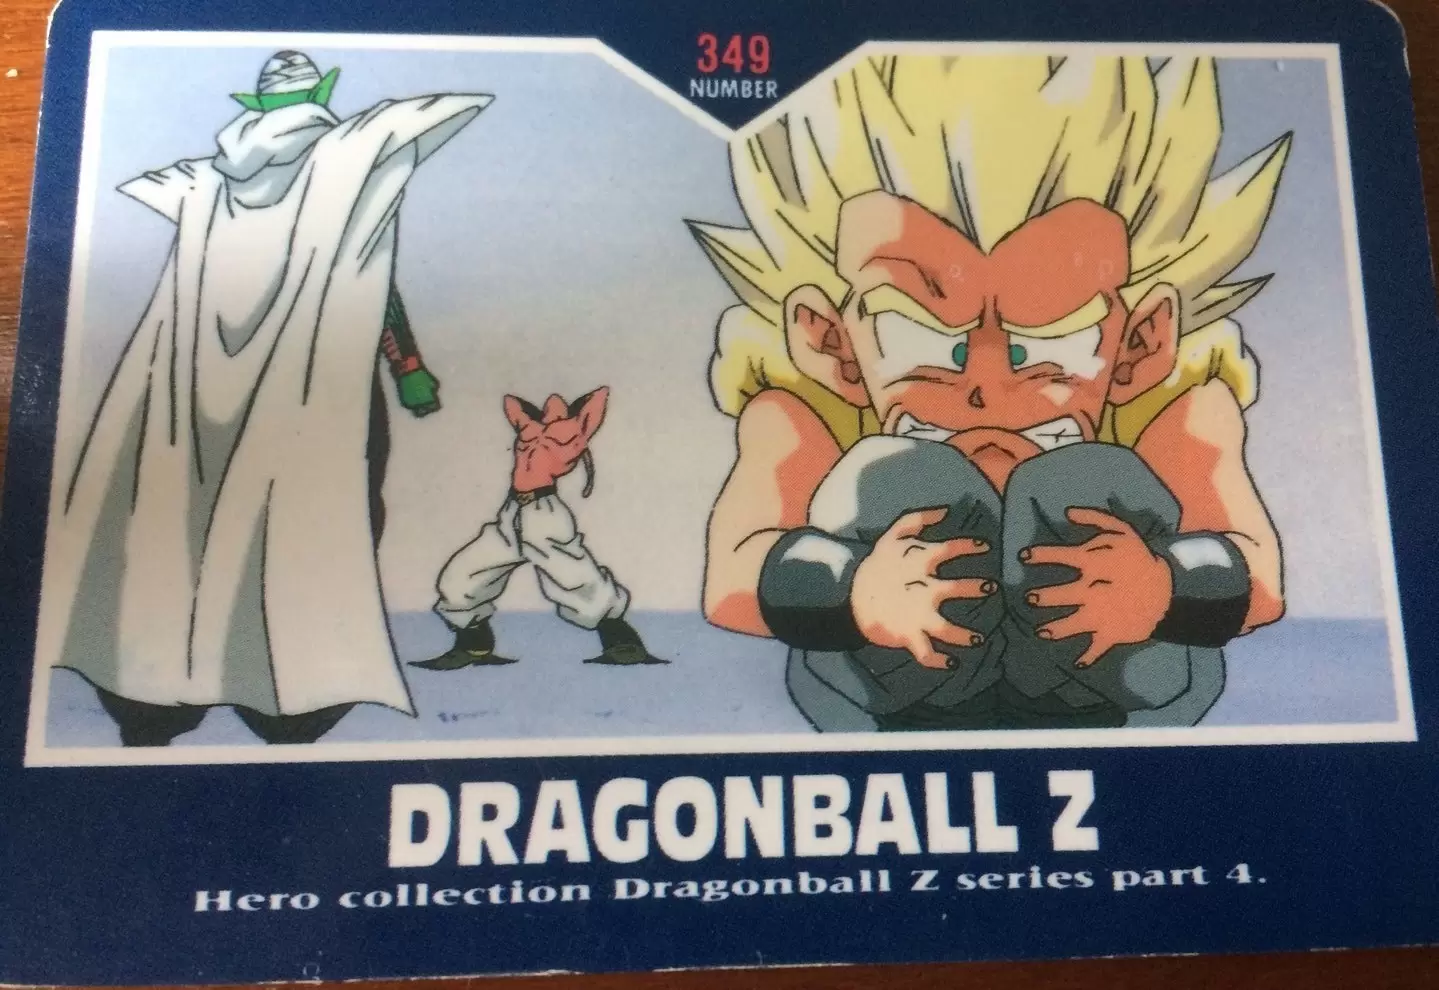 Dragon Ball Z Hero Collection Series Part 4 - Card number 349